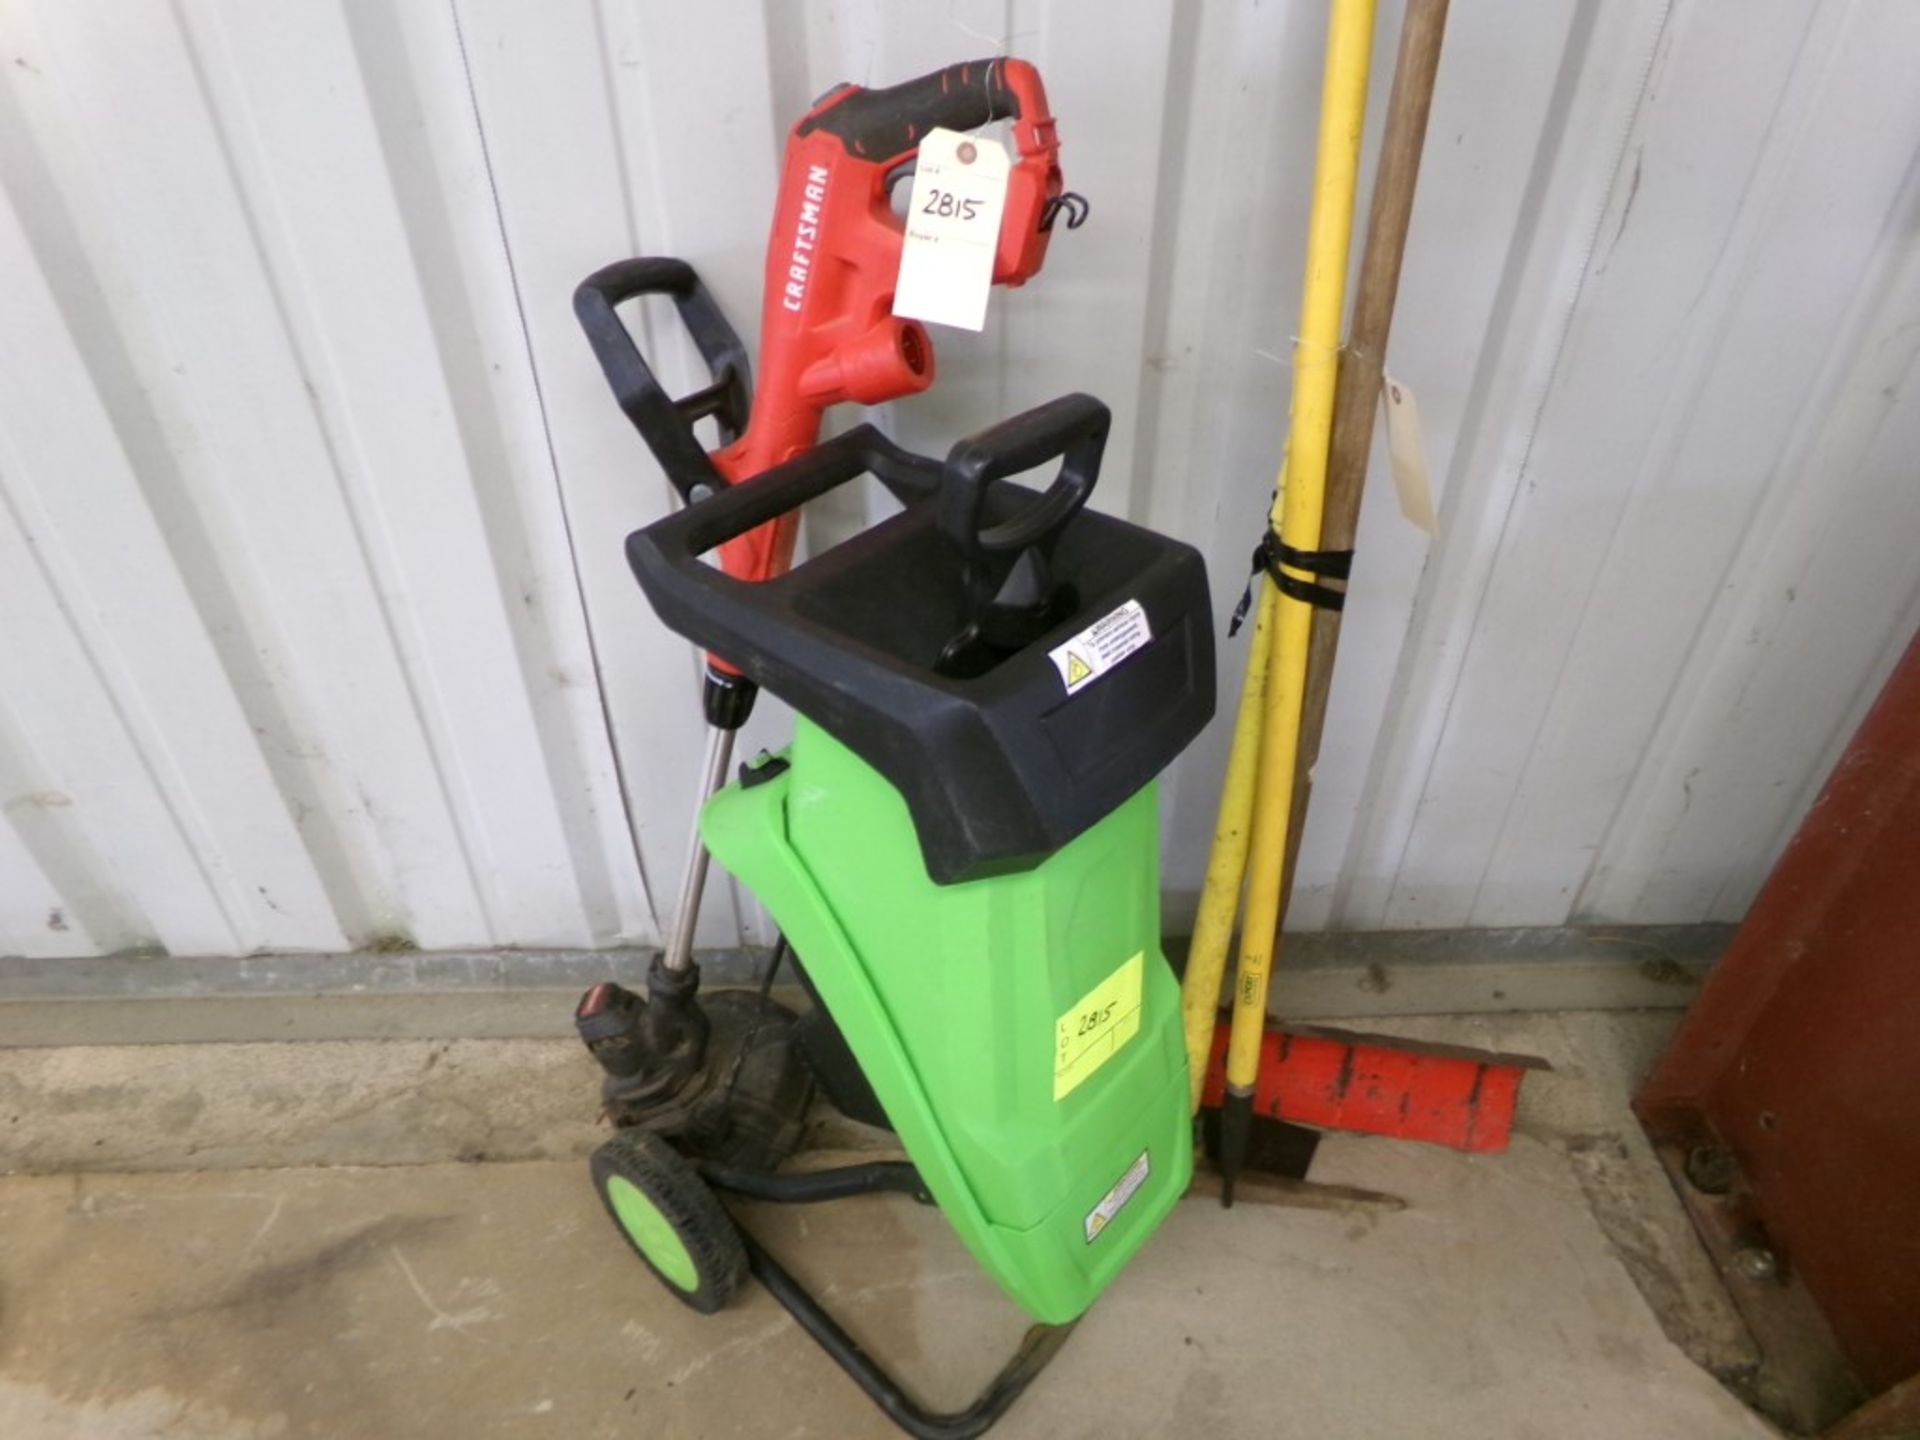 Craftsman Electric Weed Wacker, Electric Pressure Washer and Group with Pick, Hoe and Snow Shovel (